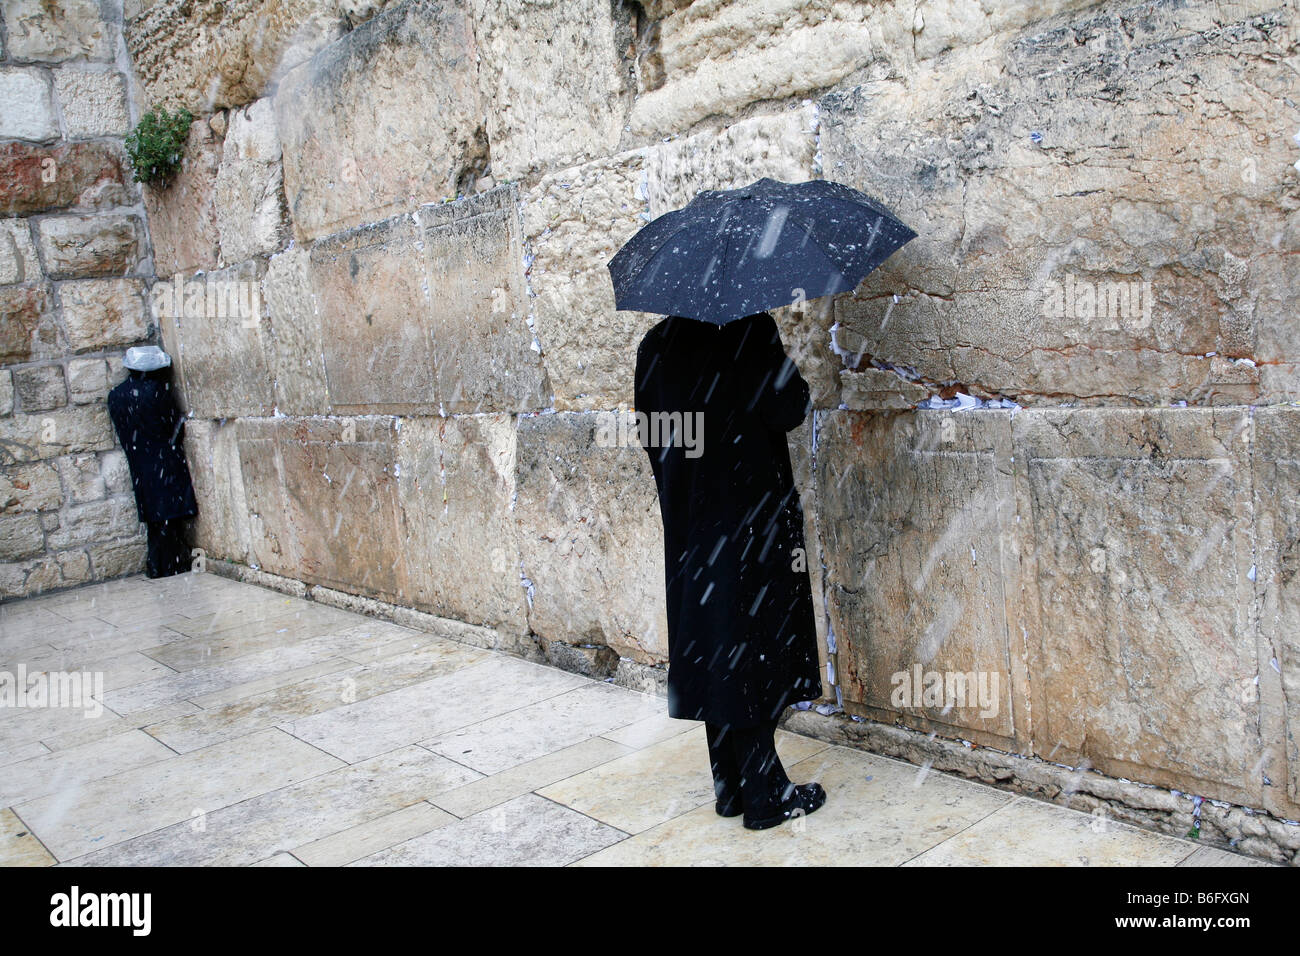 Religious Jews praying at the Western Wall in in the Old City of Jerusalem during a snow storm. Stock Photo